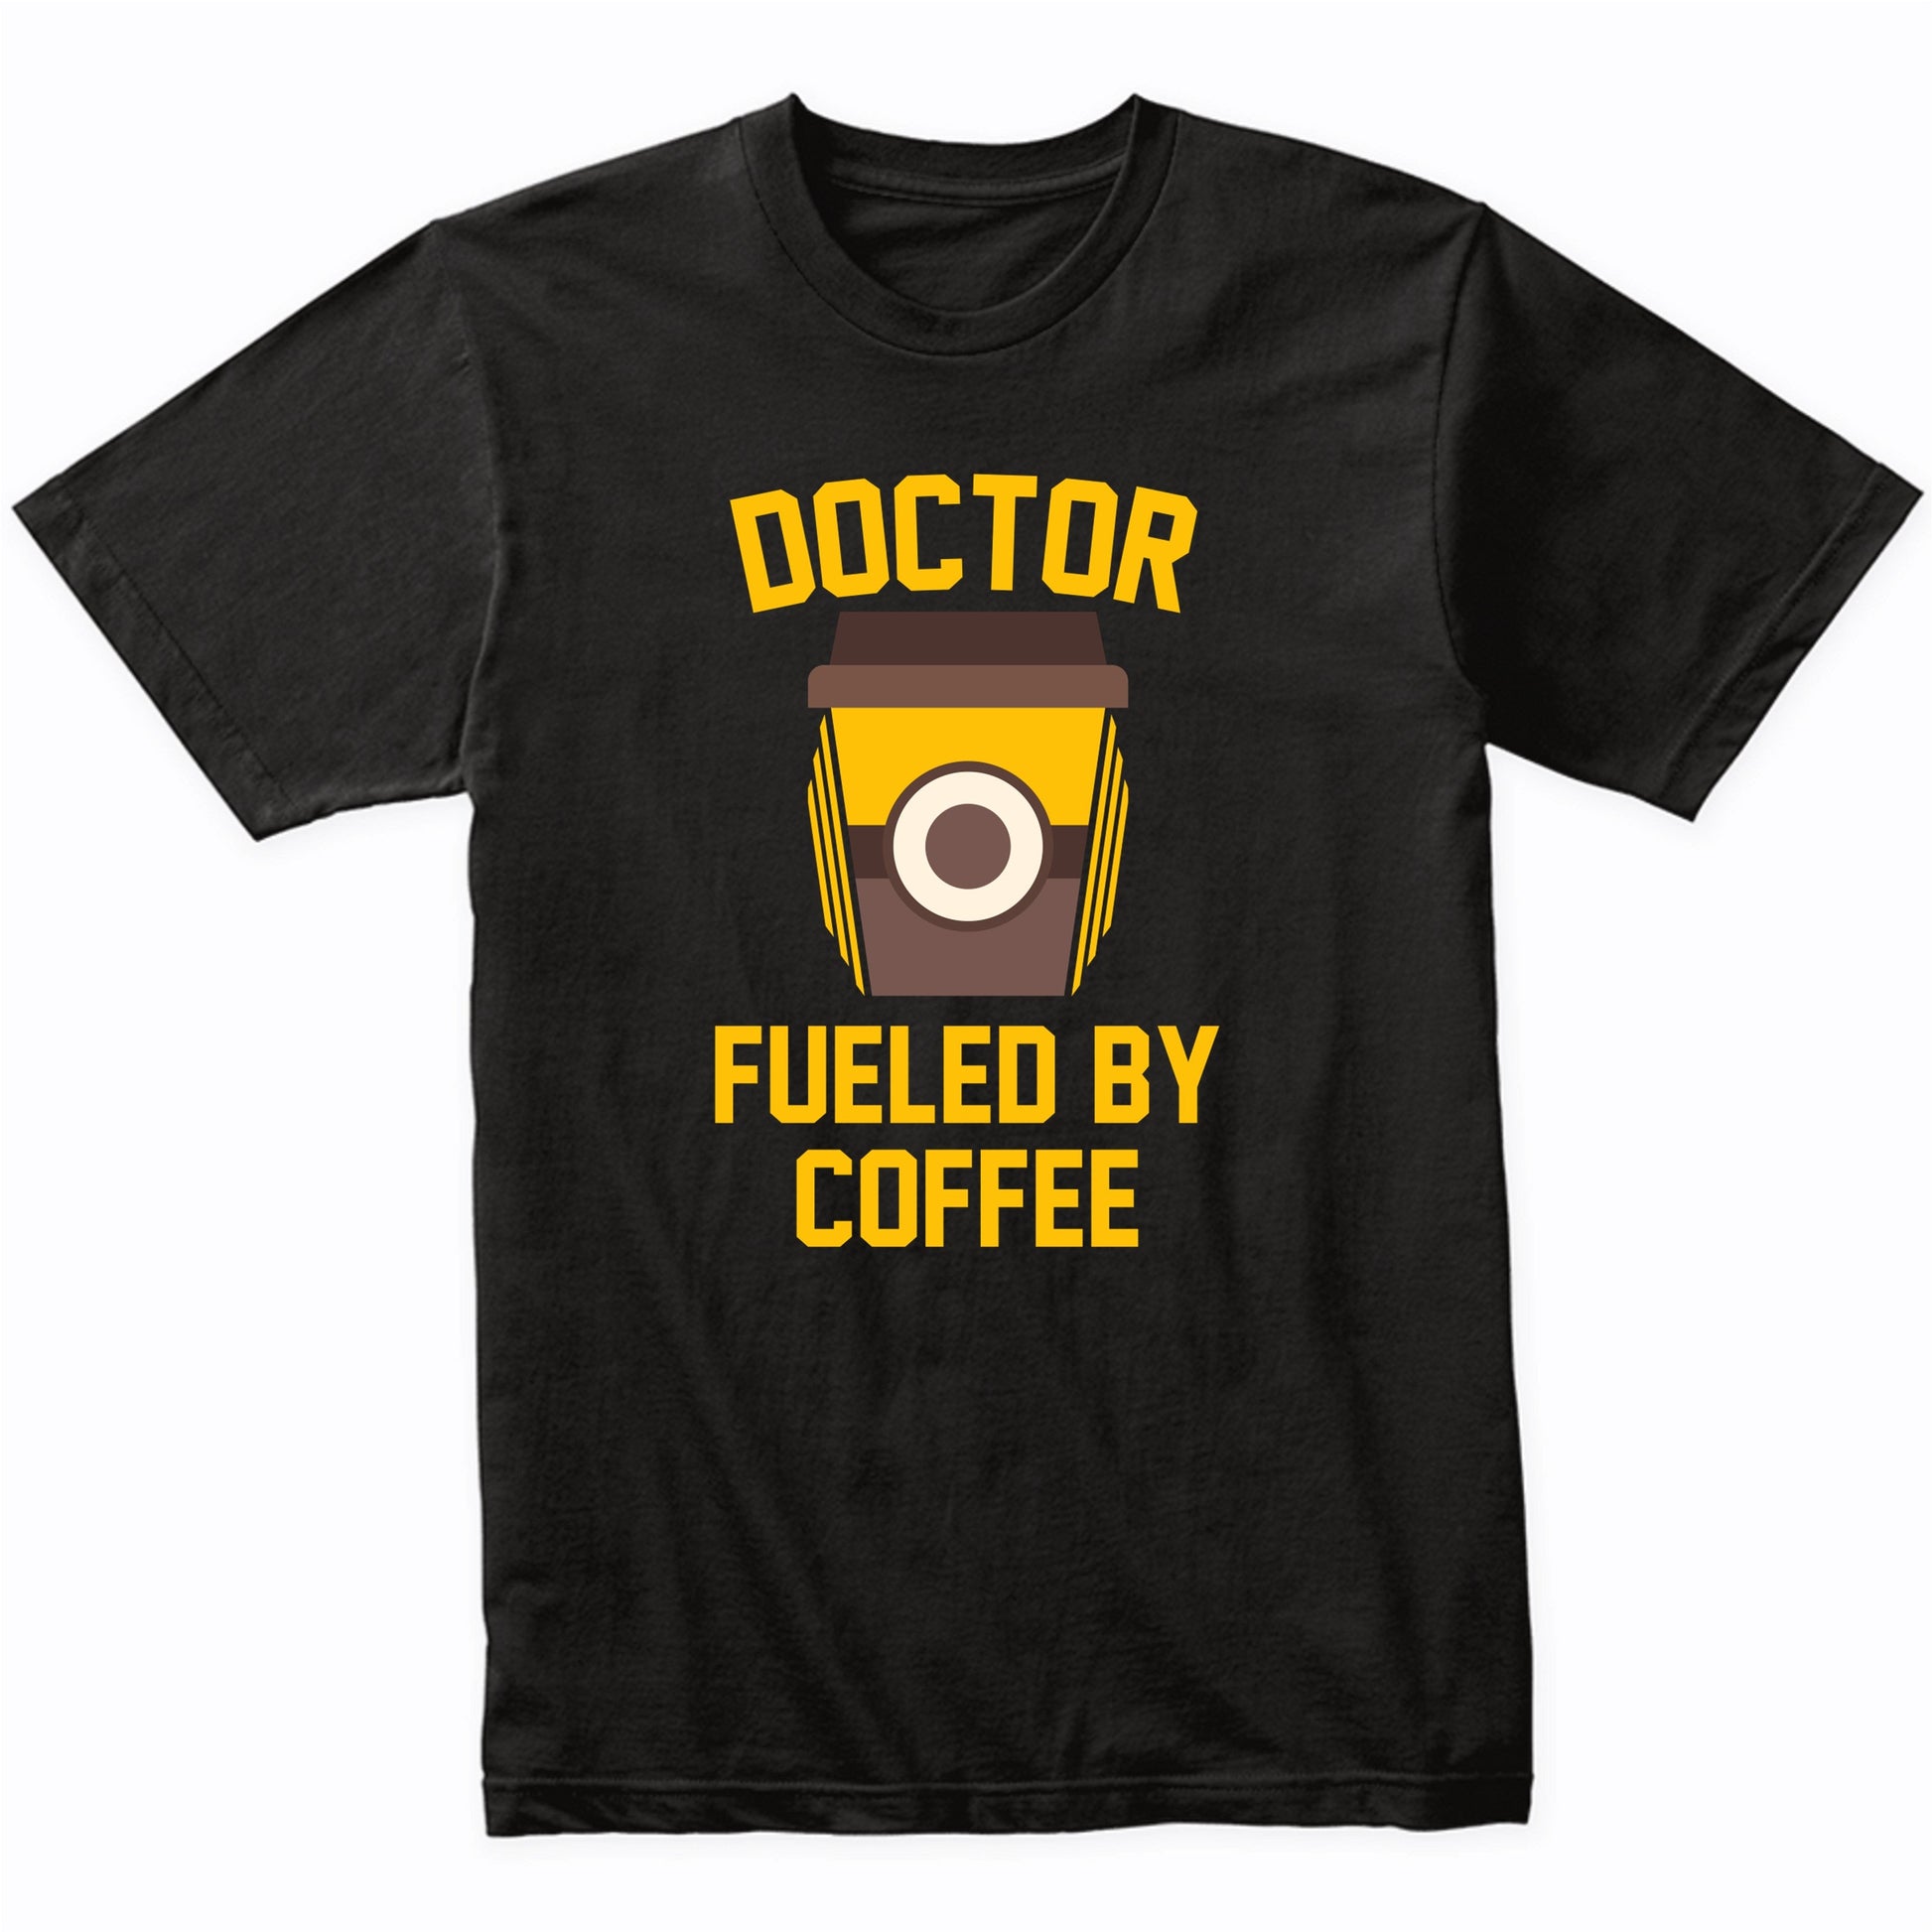 Doctor Fueled By Coffee Funny Shirt